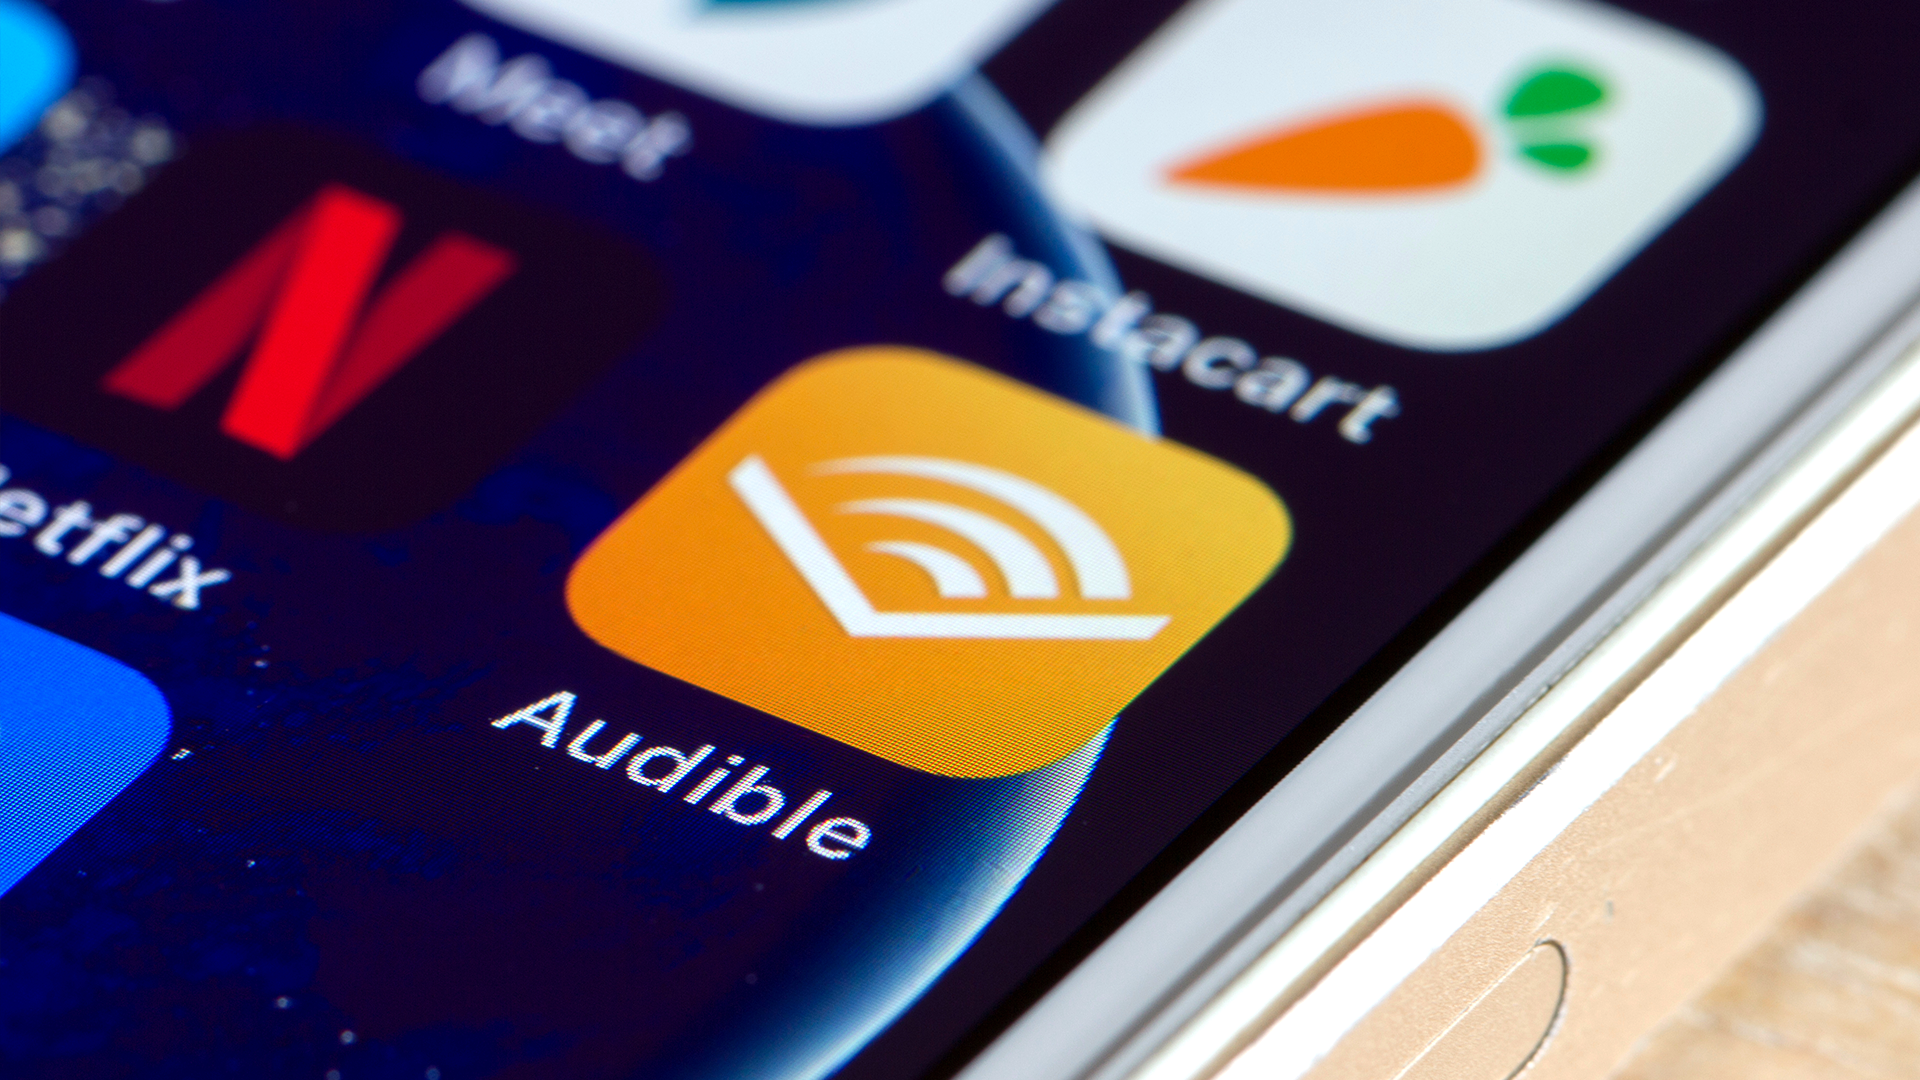 Amazon Wants Podcasts, but Easiest If They’re Pro-Amazon